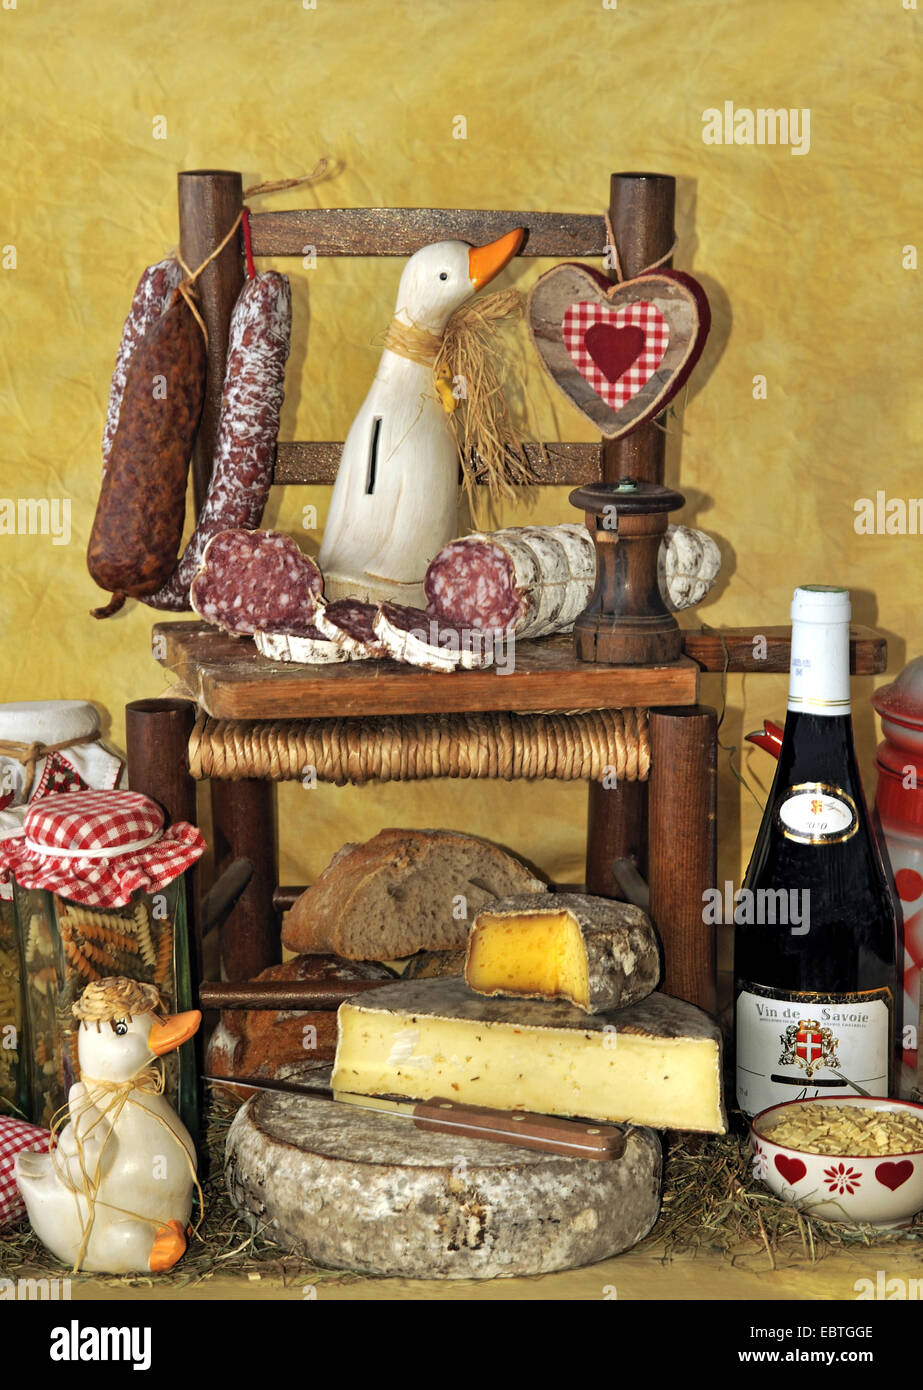 speciality cheese and sausages, foods from Alps mountains, France Stock Photo